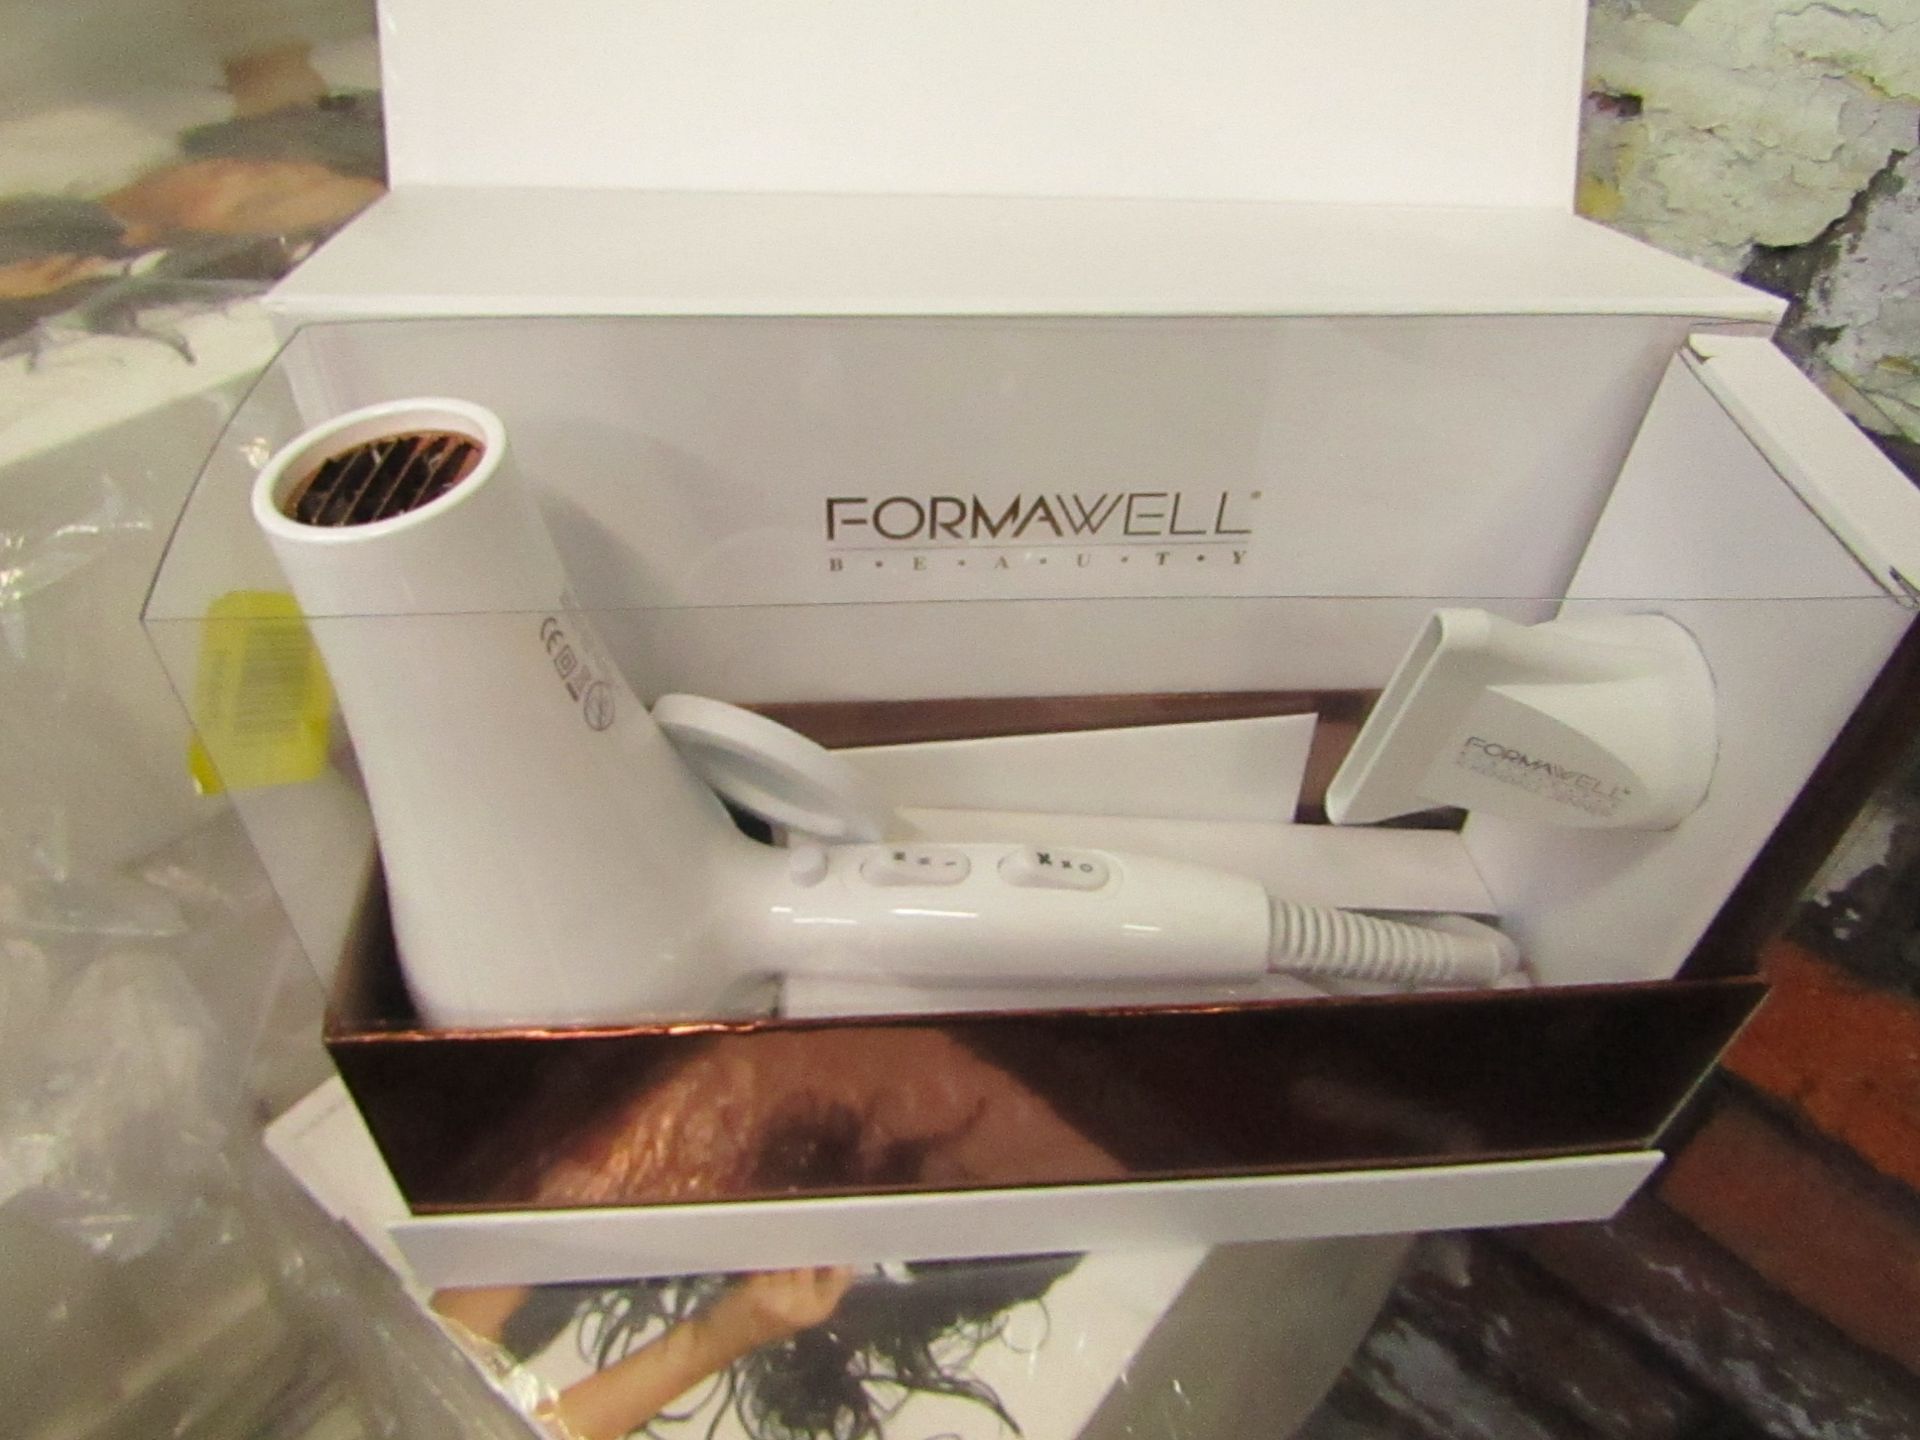 | 1X | KENDALL JENNER FORMAWELL BEAUTY PRO IONIC HAIR DRYER | REFURBISHED AND BOXED | NO ONLINE RE-